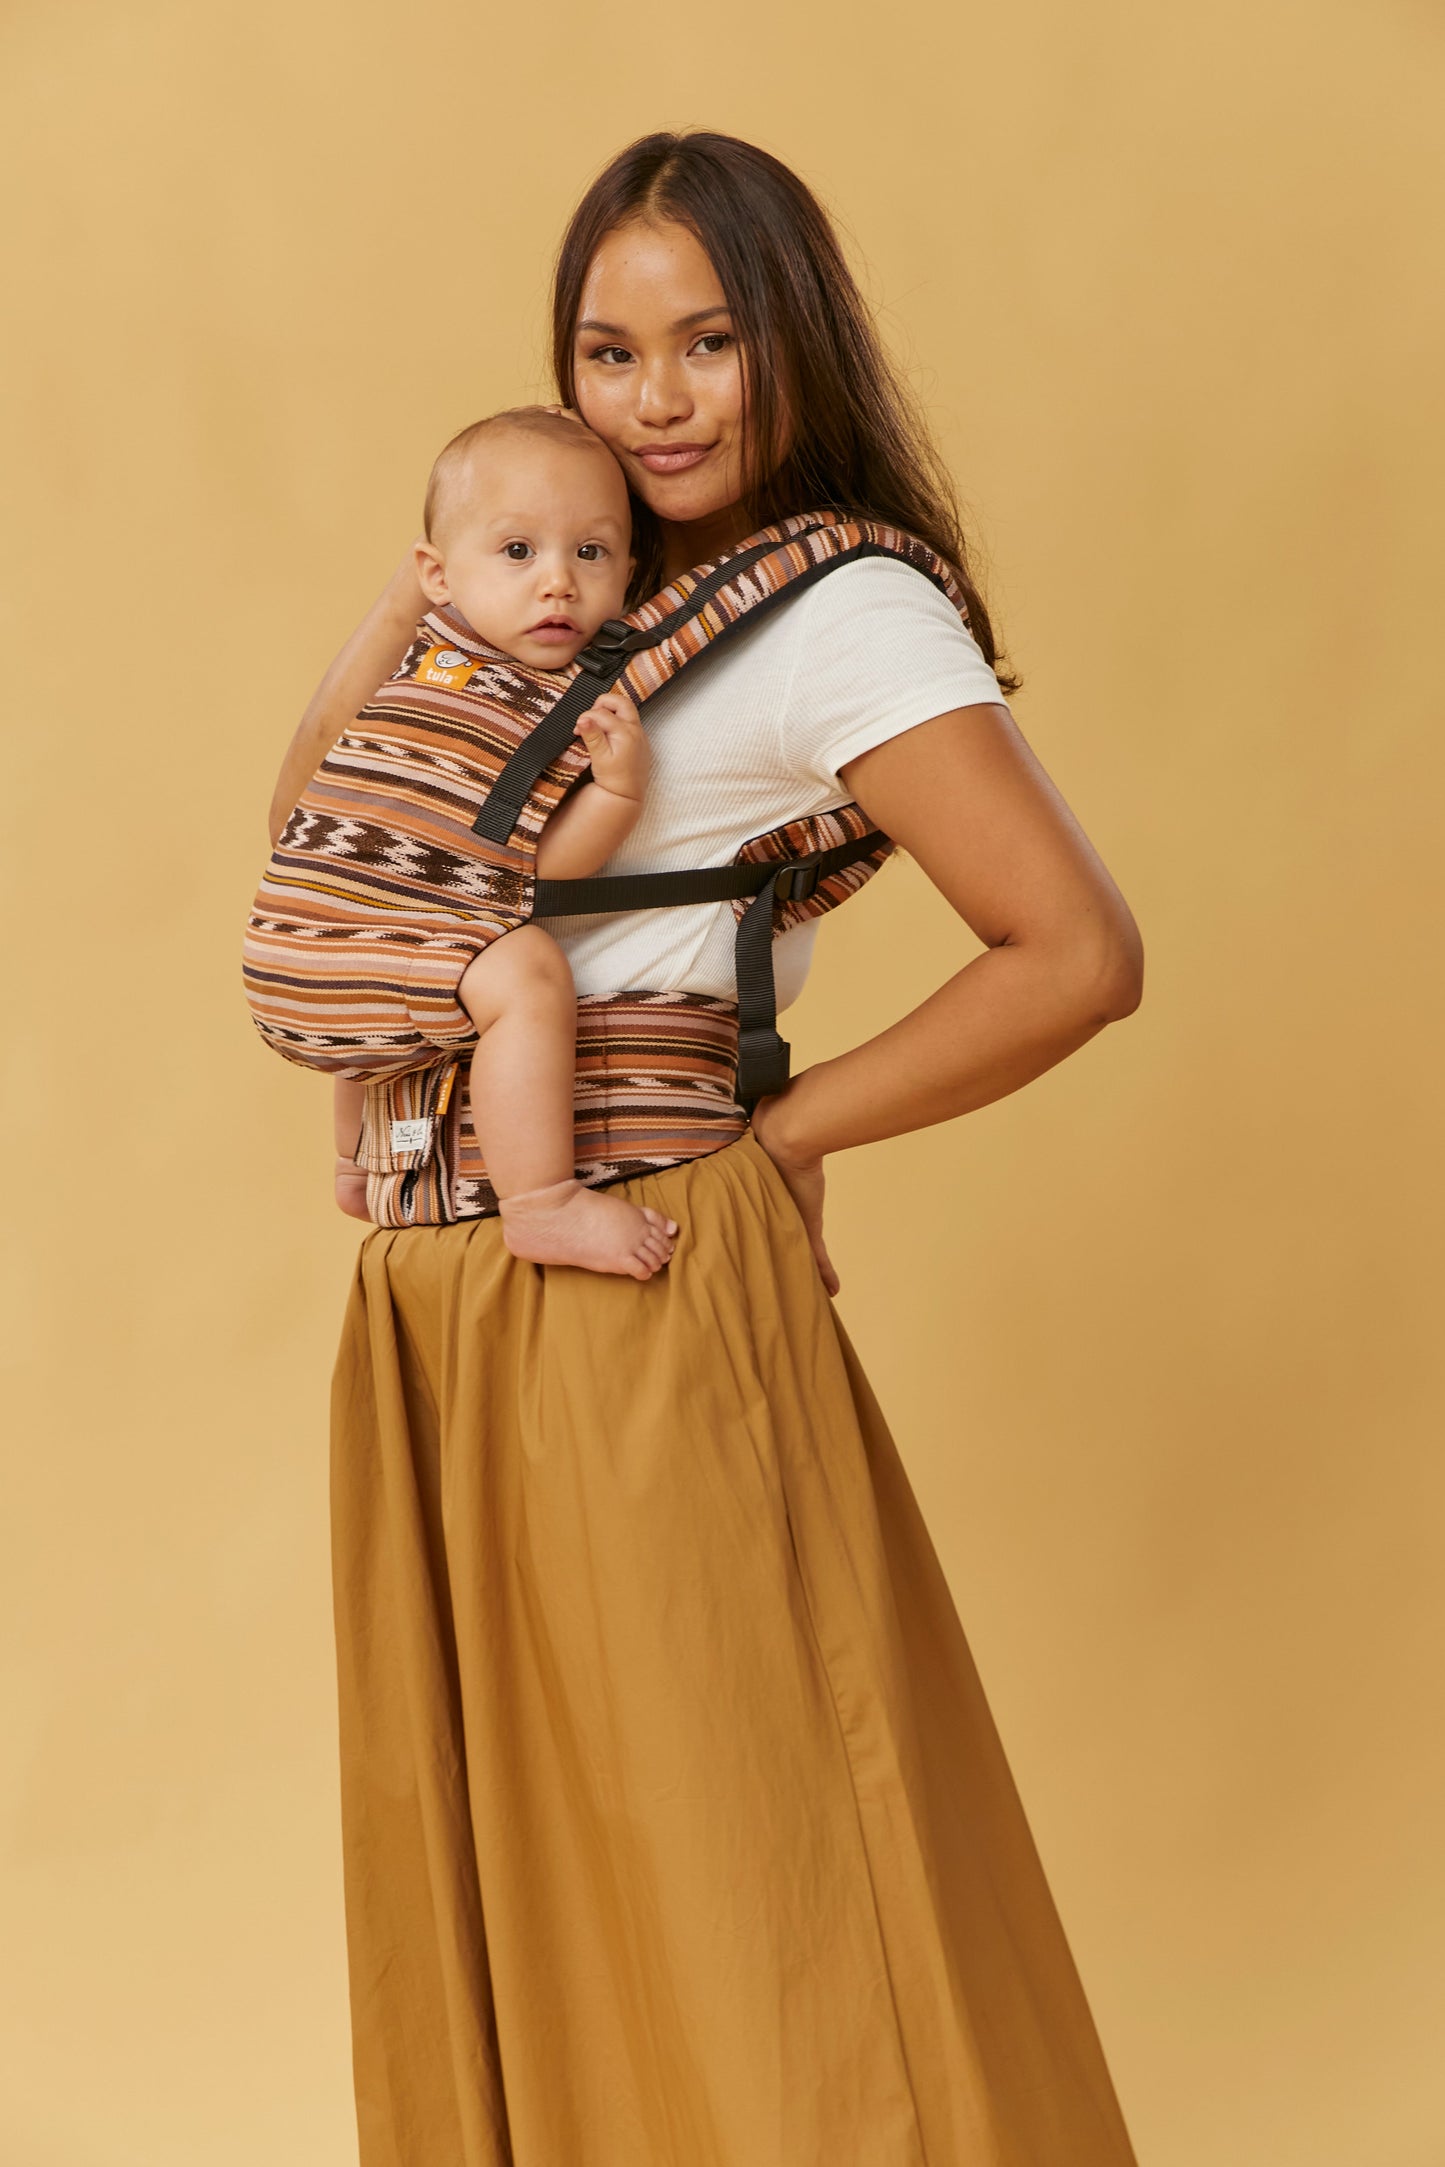 Almendra - Signature Woven Free-to-Grow Baby Carrier